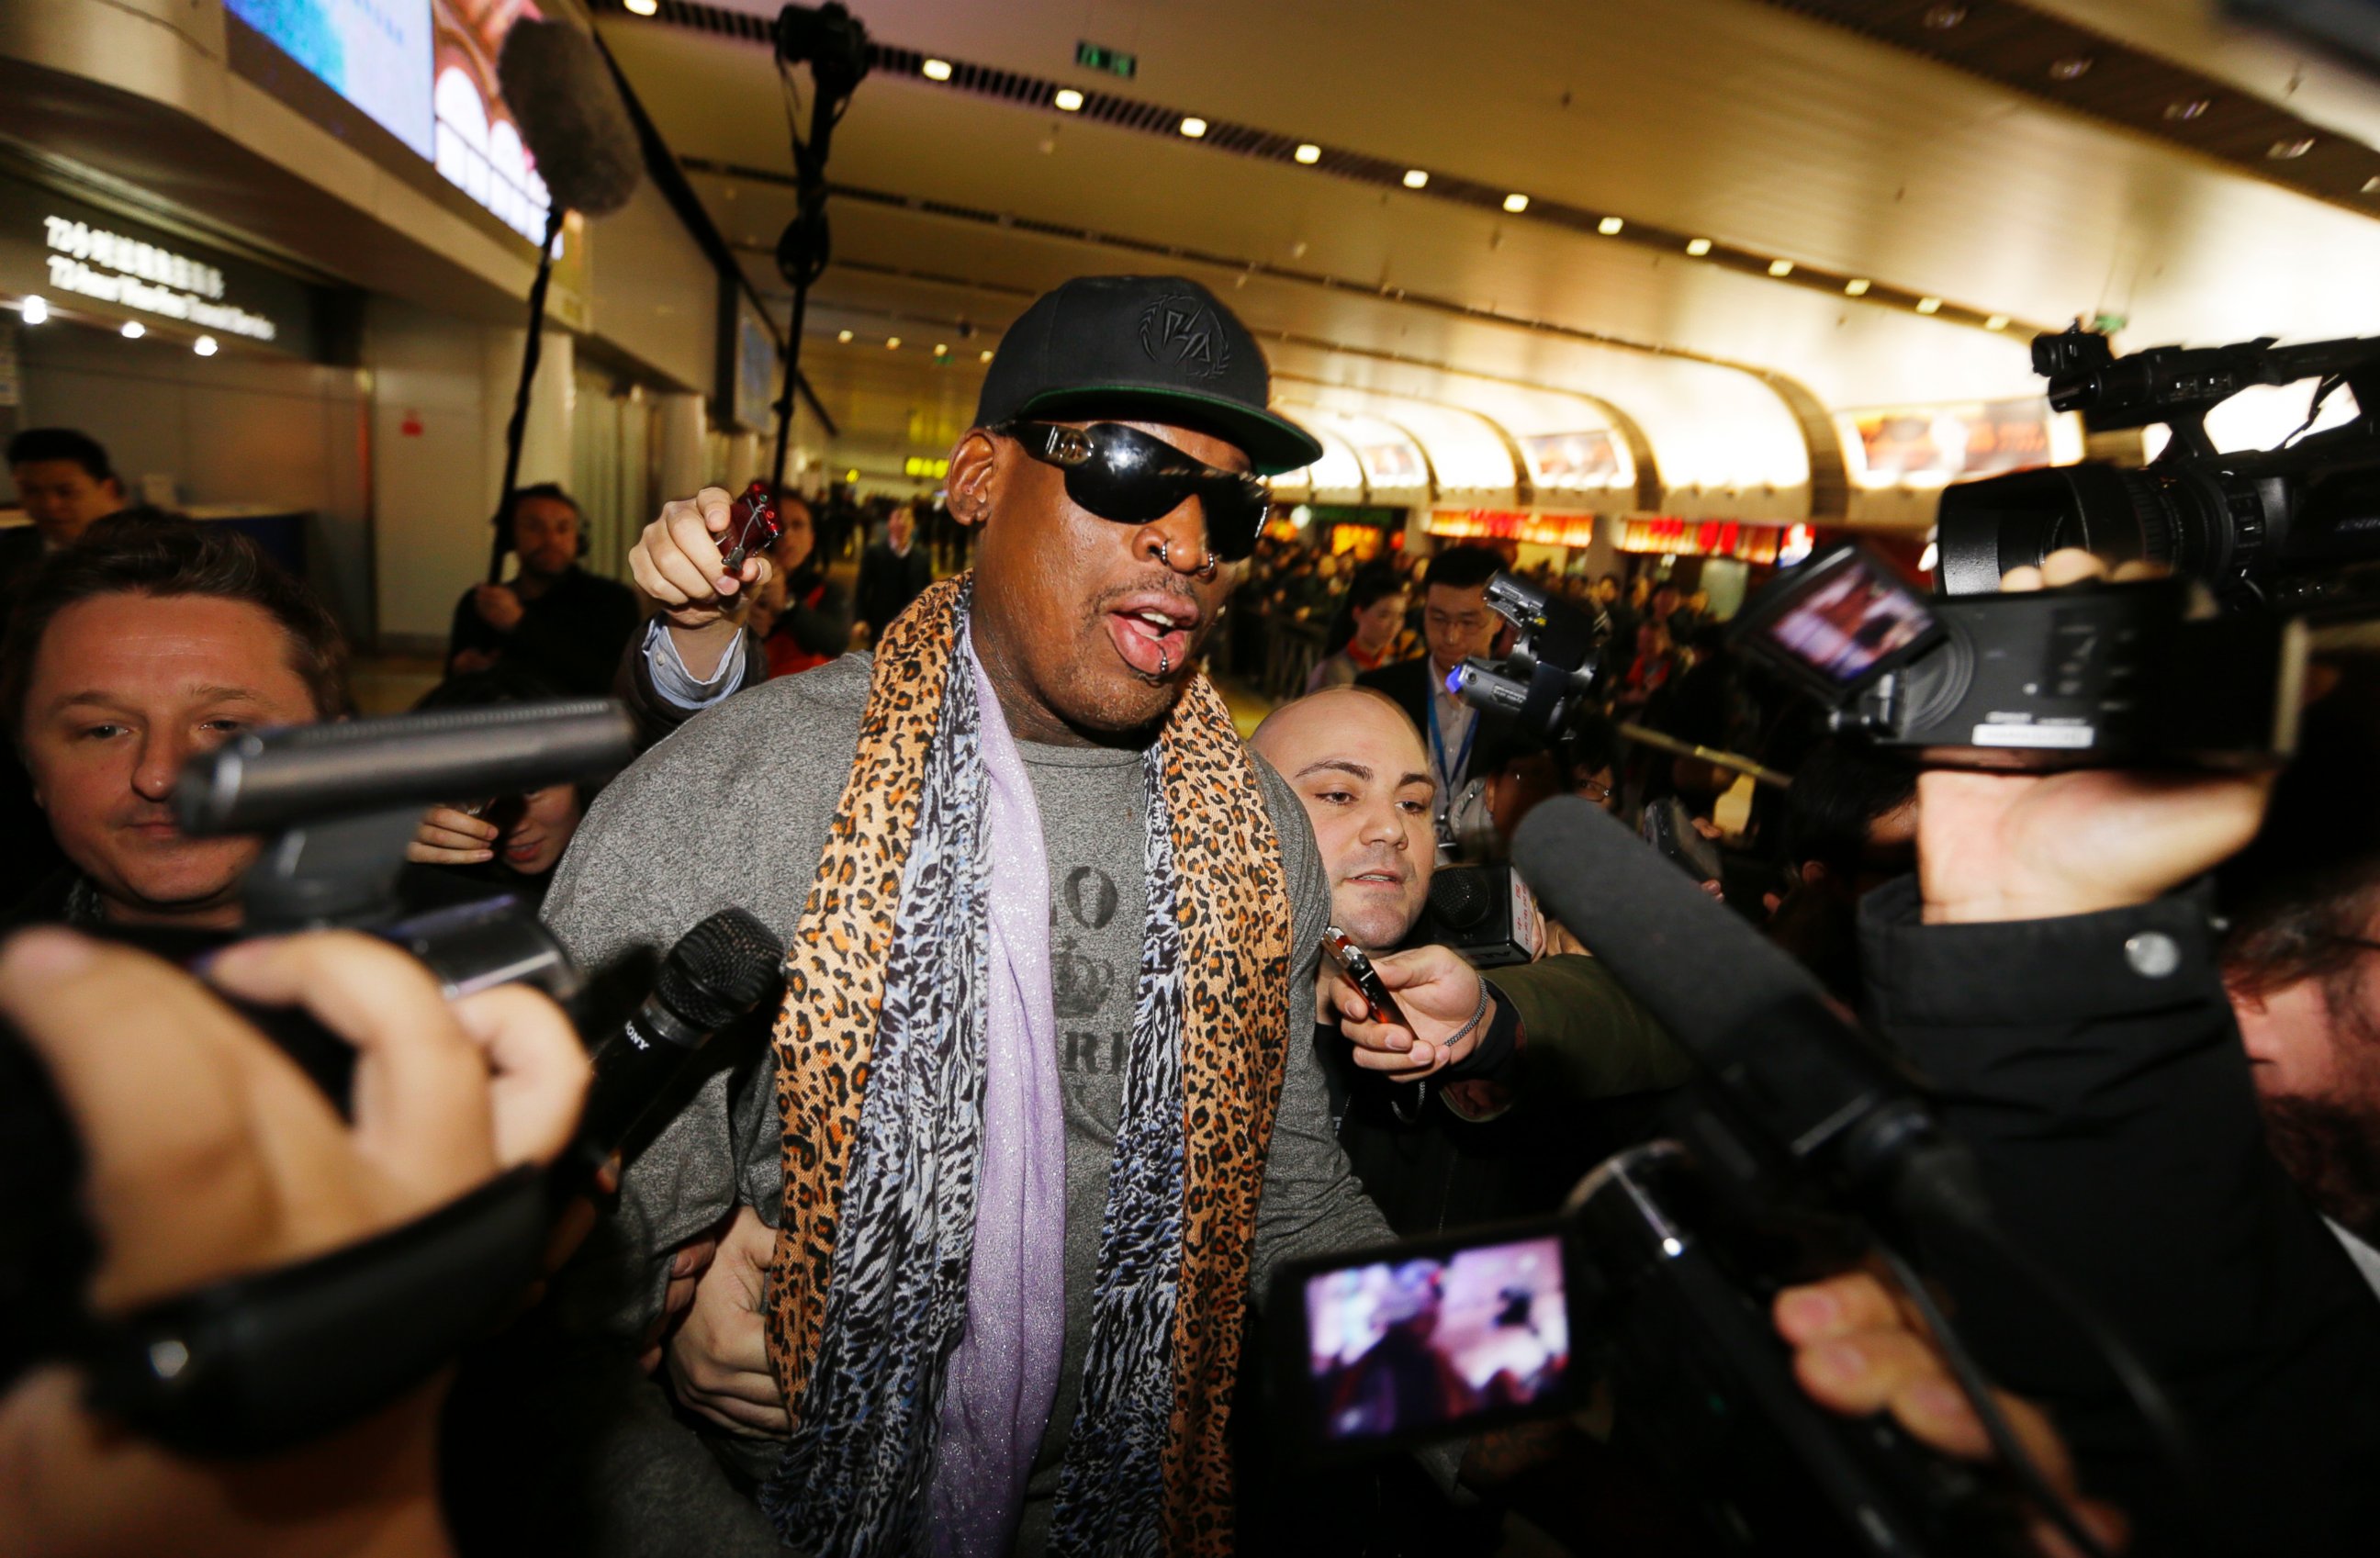 PHOTO: Former NBA basketball player Dennis Rodman speaks to the media after returning from his trip to North Korea at Beijing airport, Dec. 23, 2013.